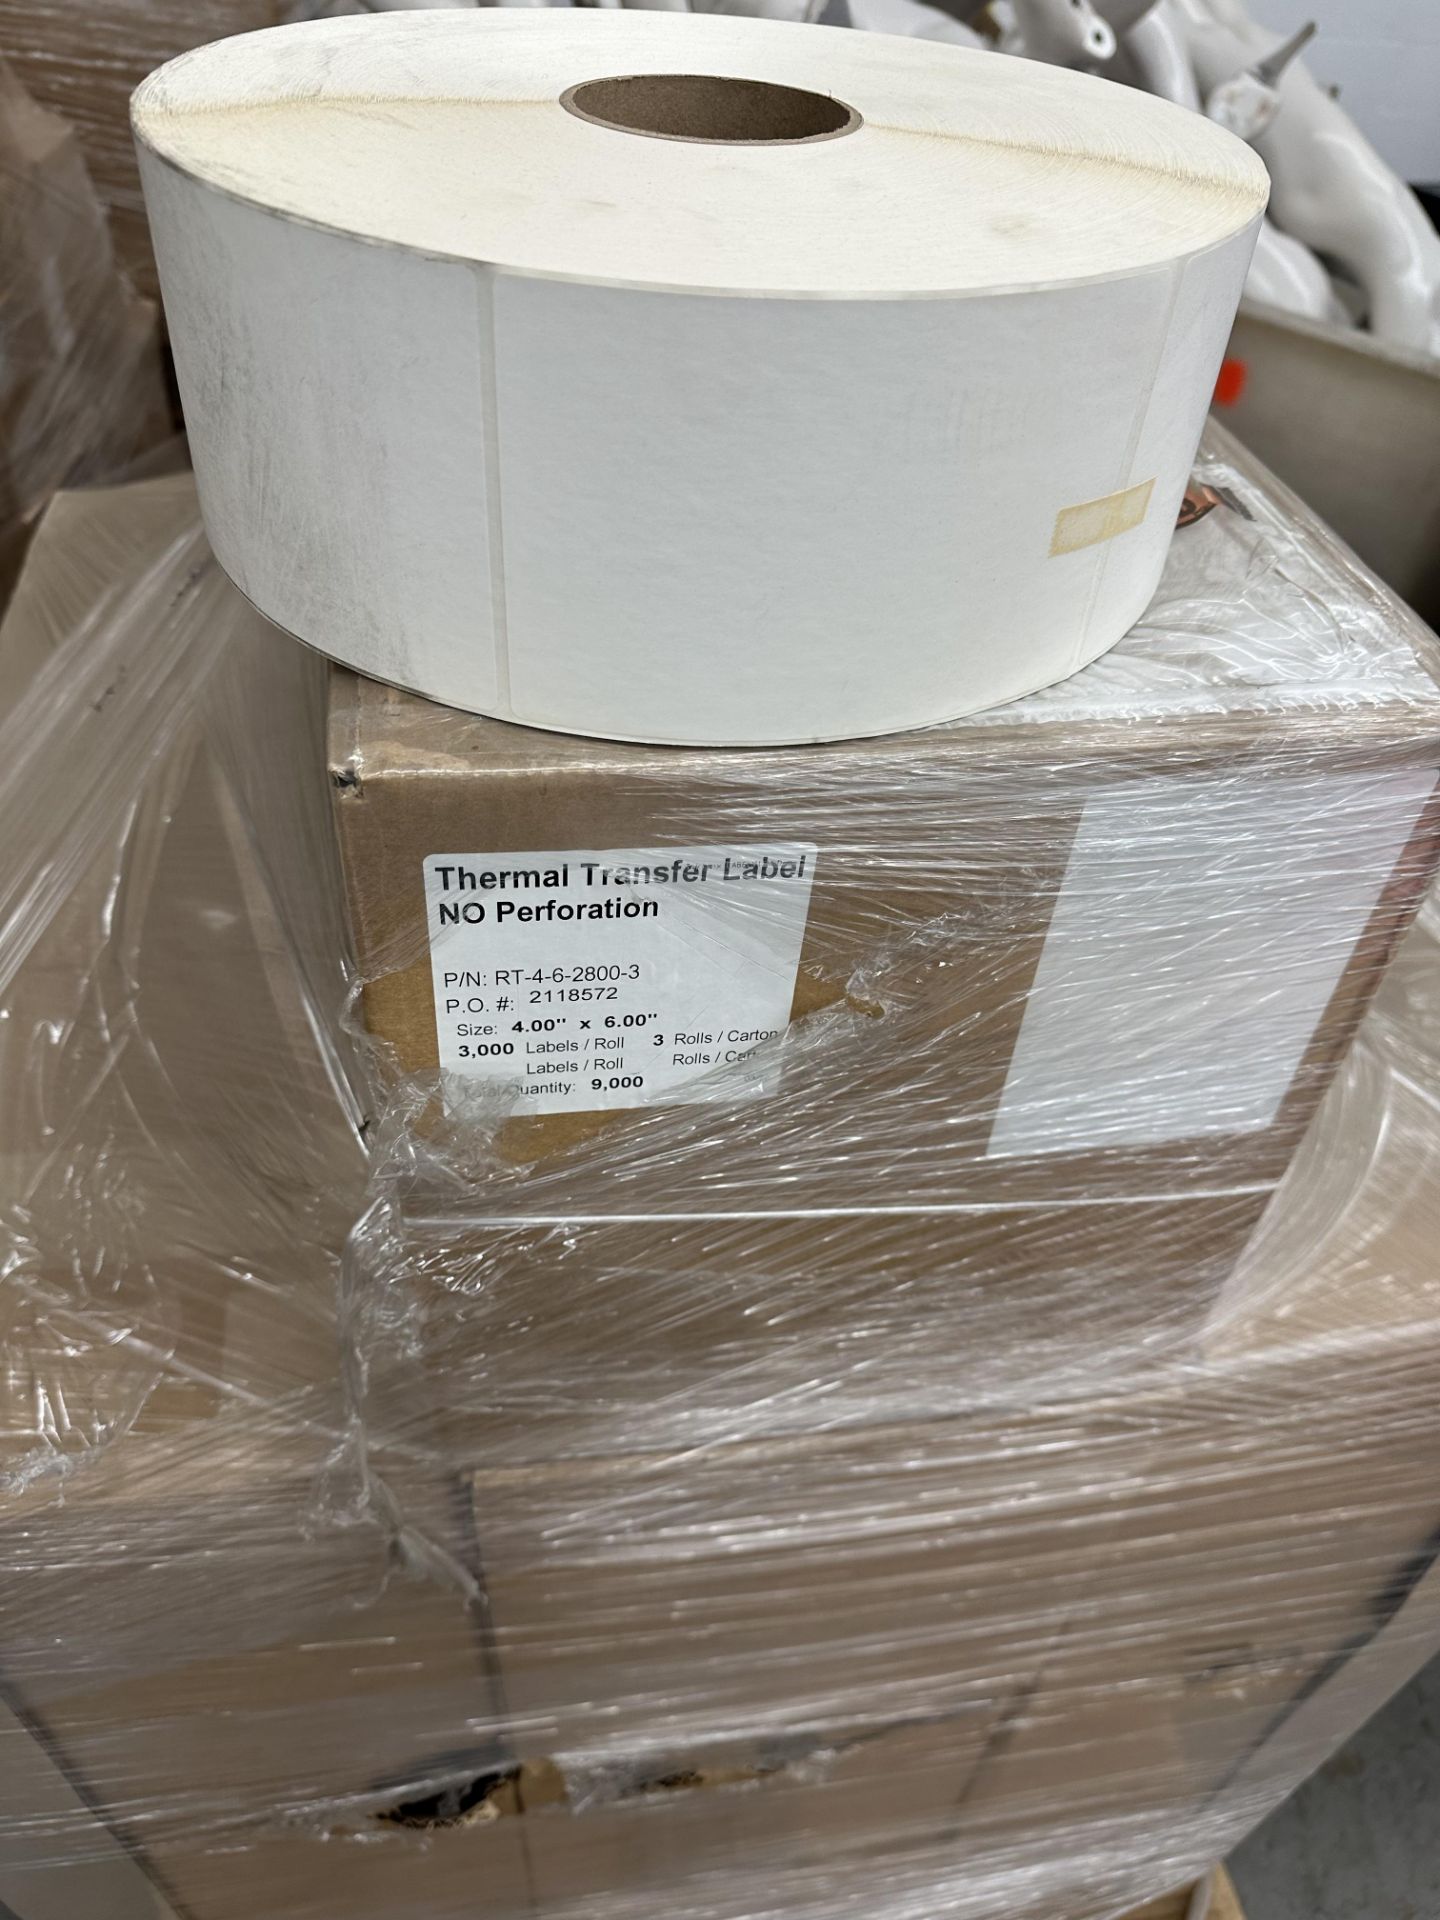 (30) Cases Thermal Transfer Label No Perforation P/N: RT-4-6-2800-3, 4" x 6" (9,000 Qty Per Case - - - Image 2 of 2